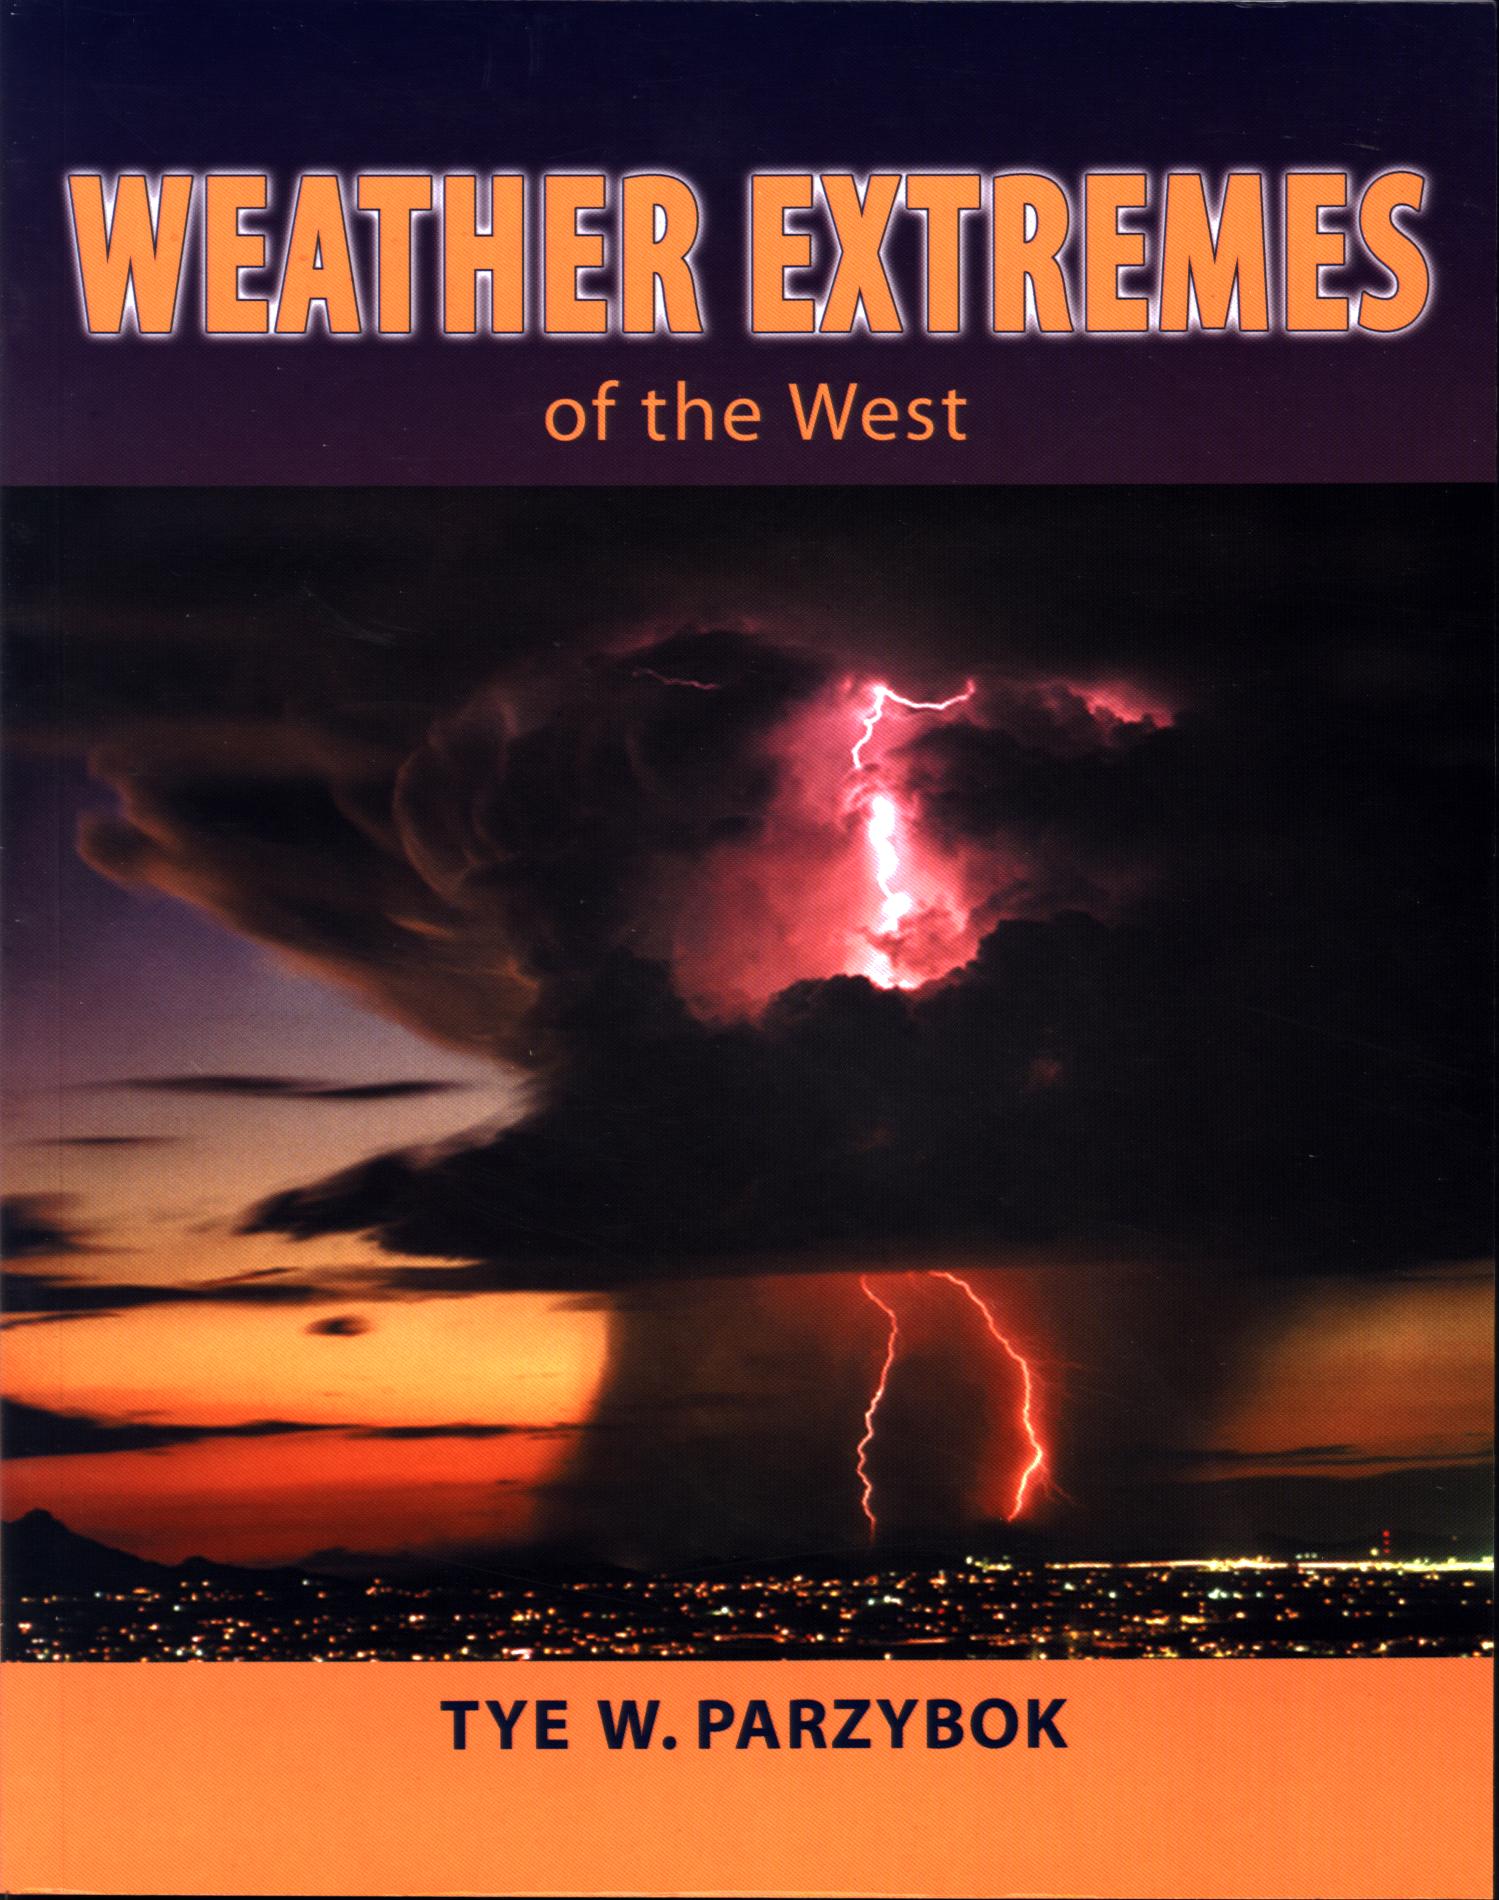 WEATHER EXTREMES OF THE WEST.